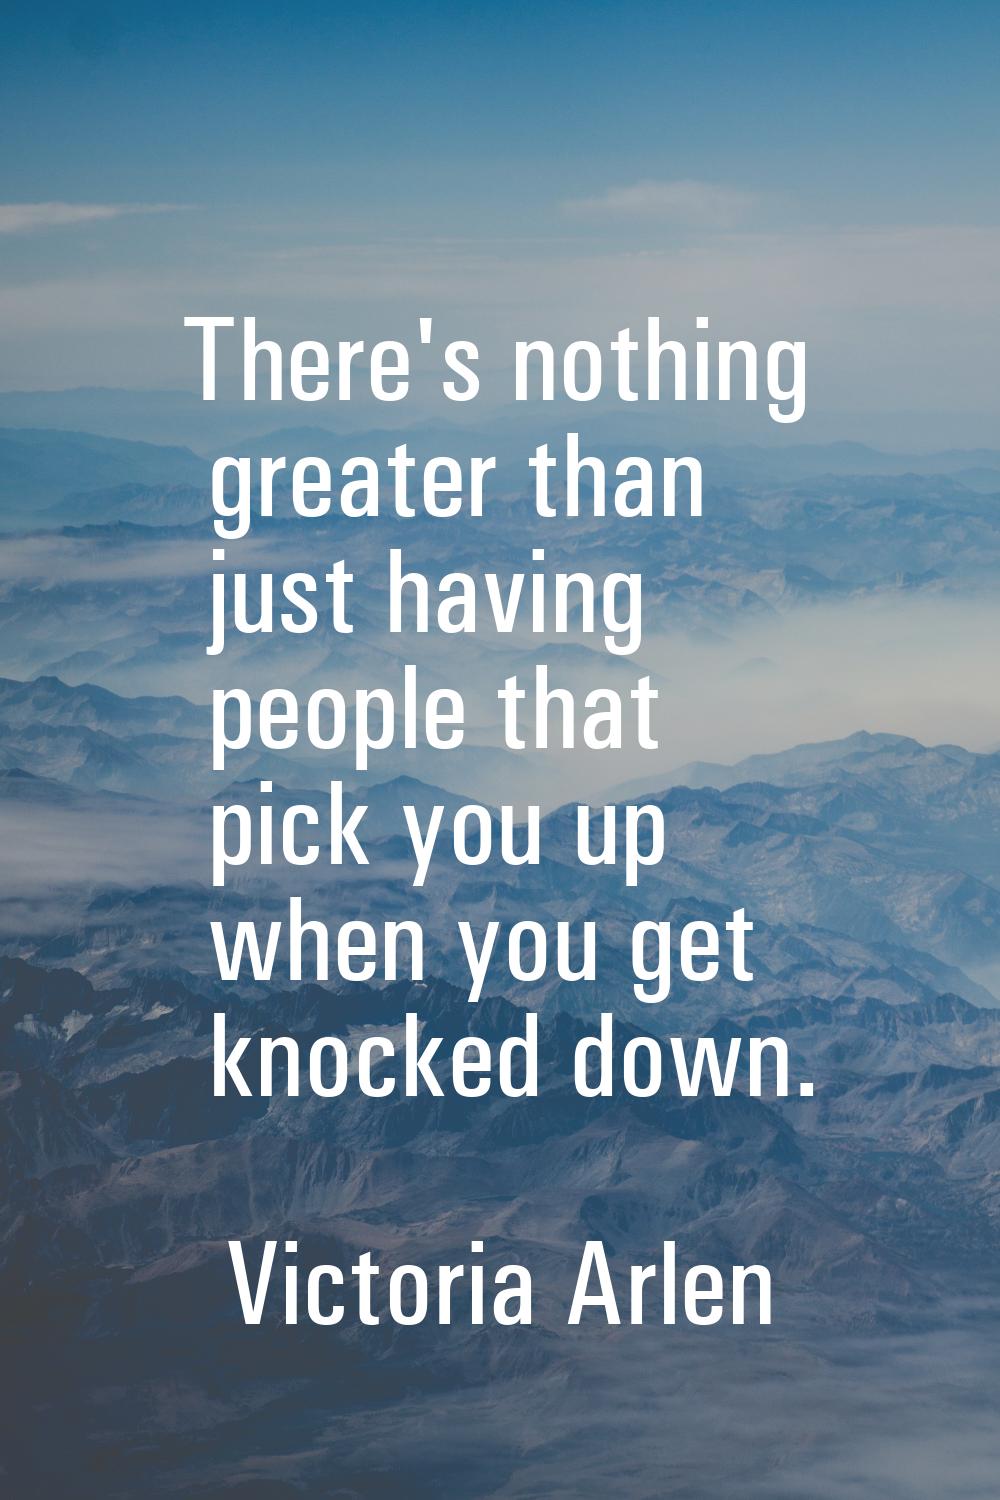 There's nothing greater than just having people that pick you up when you get knocked down.